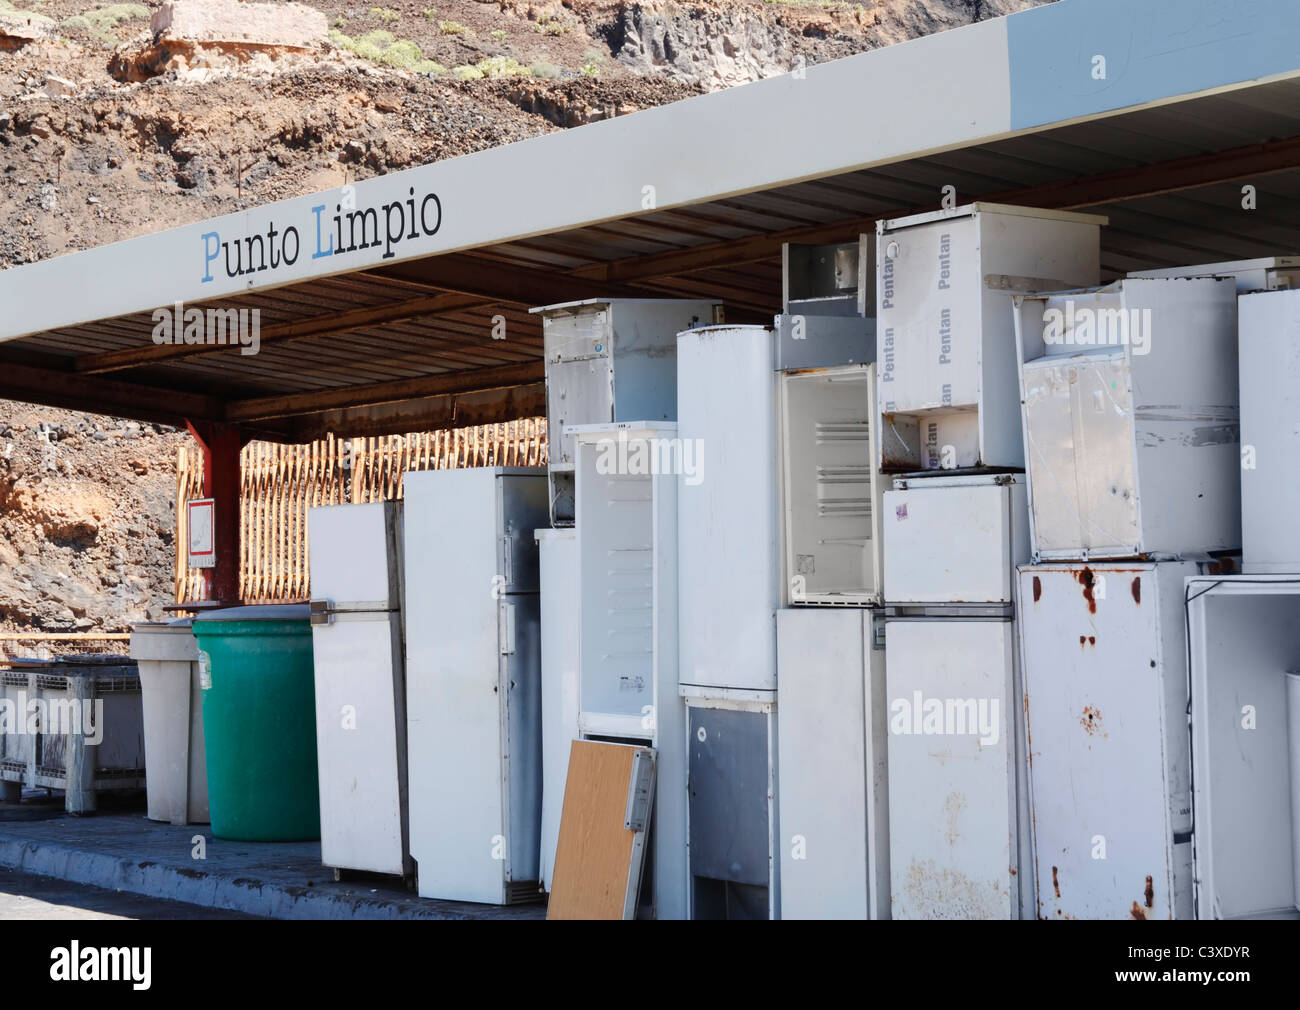 Fridges at council recycling centre, punto limpio (clean point) in Spain Stock Photo